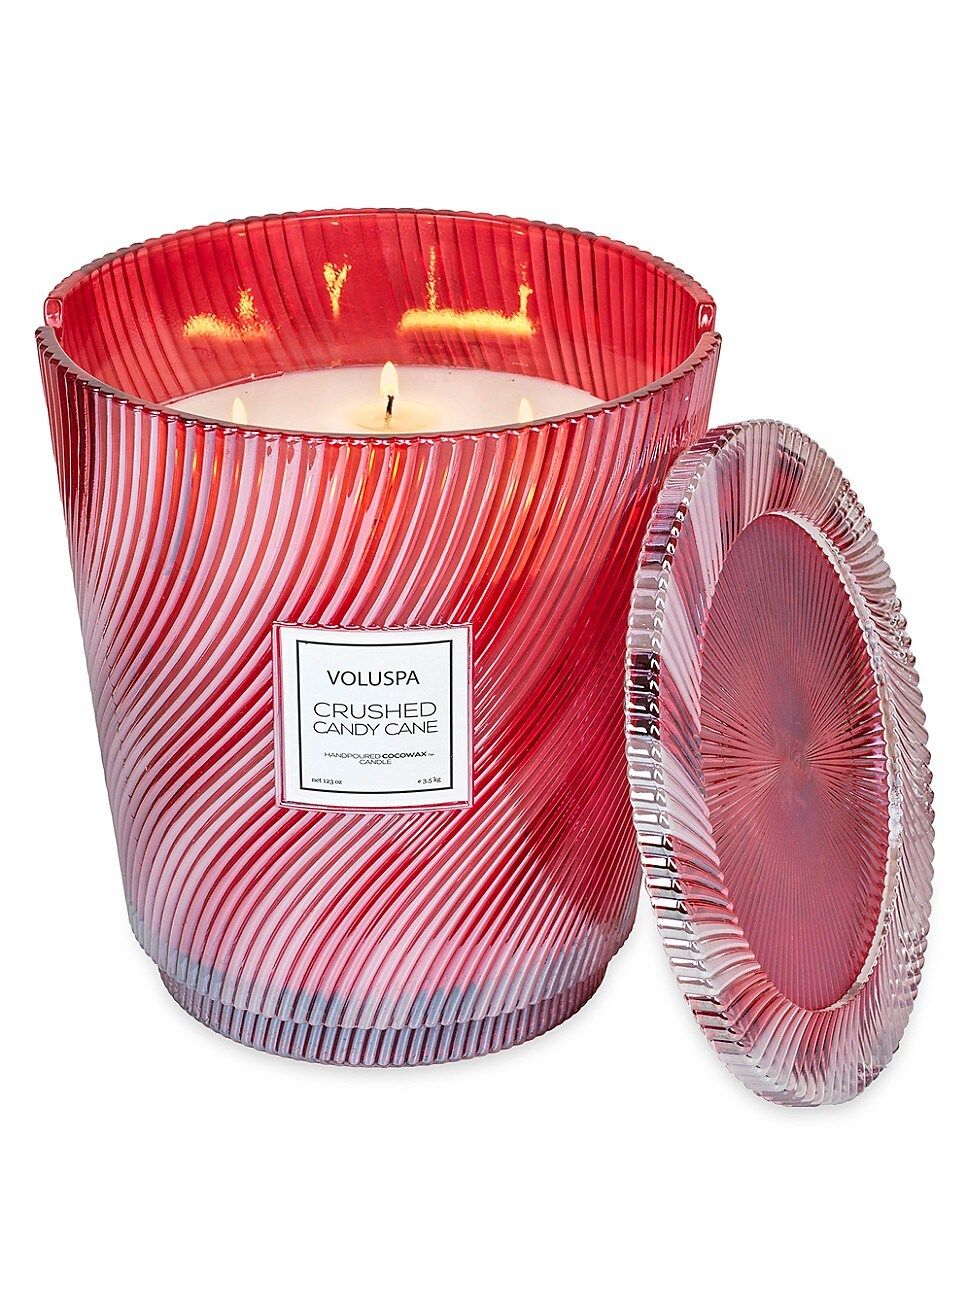 Crushed Candy Cane 5-Wick Candle | Saks Fifth Avenue